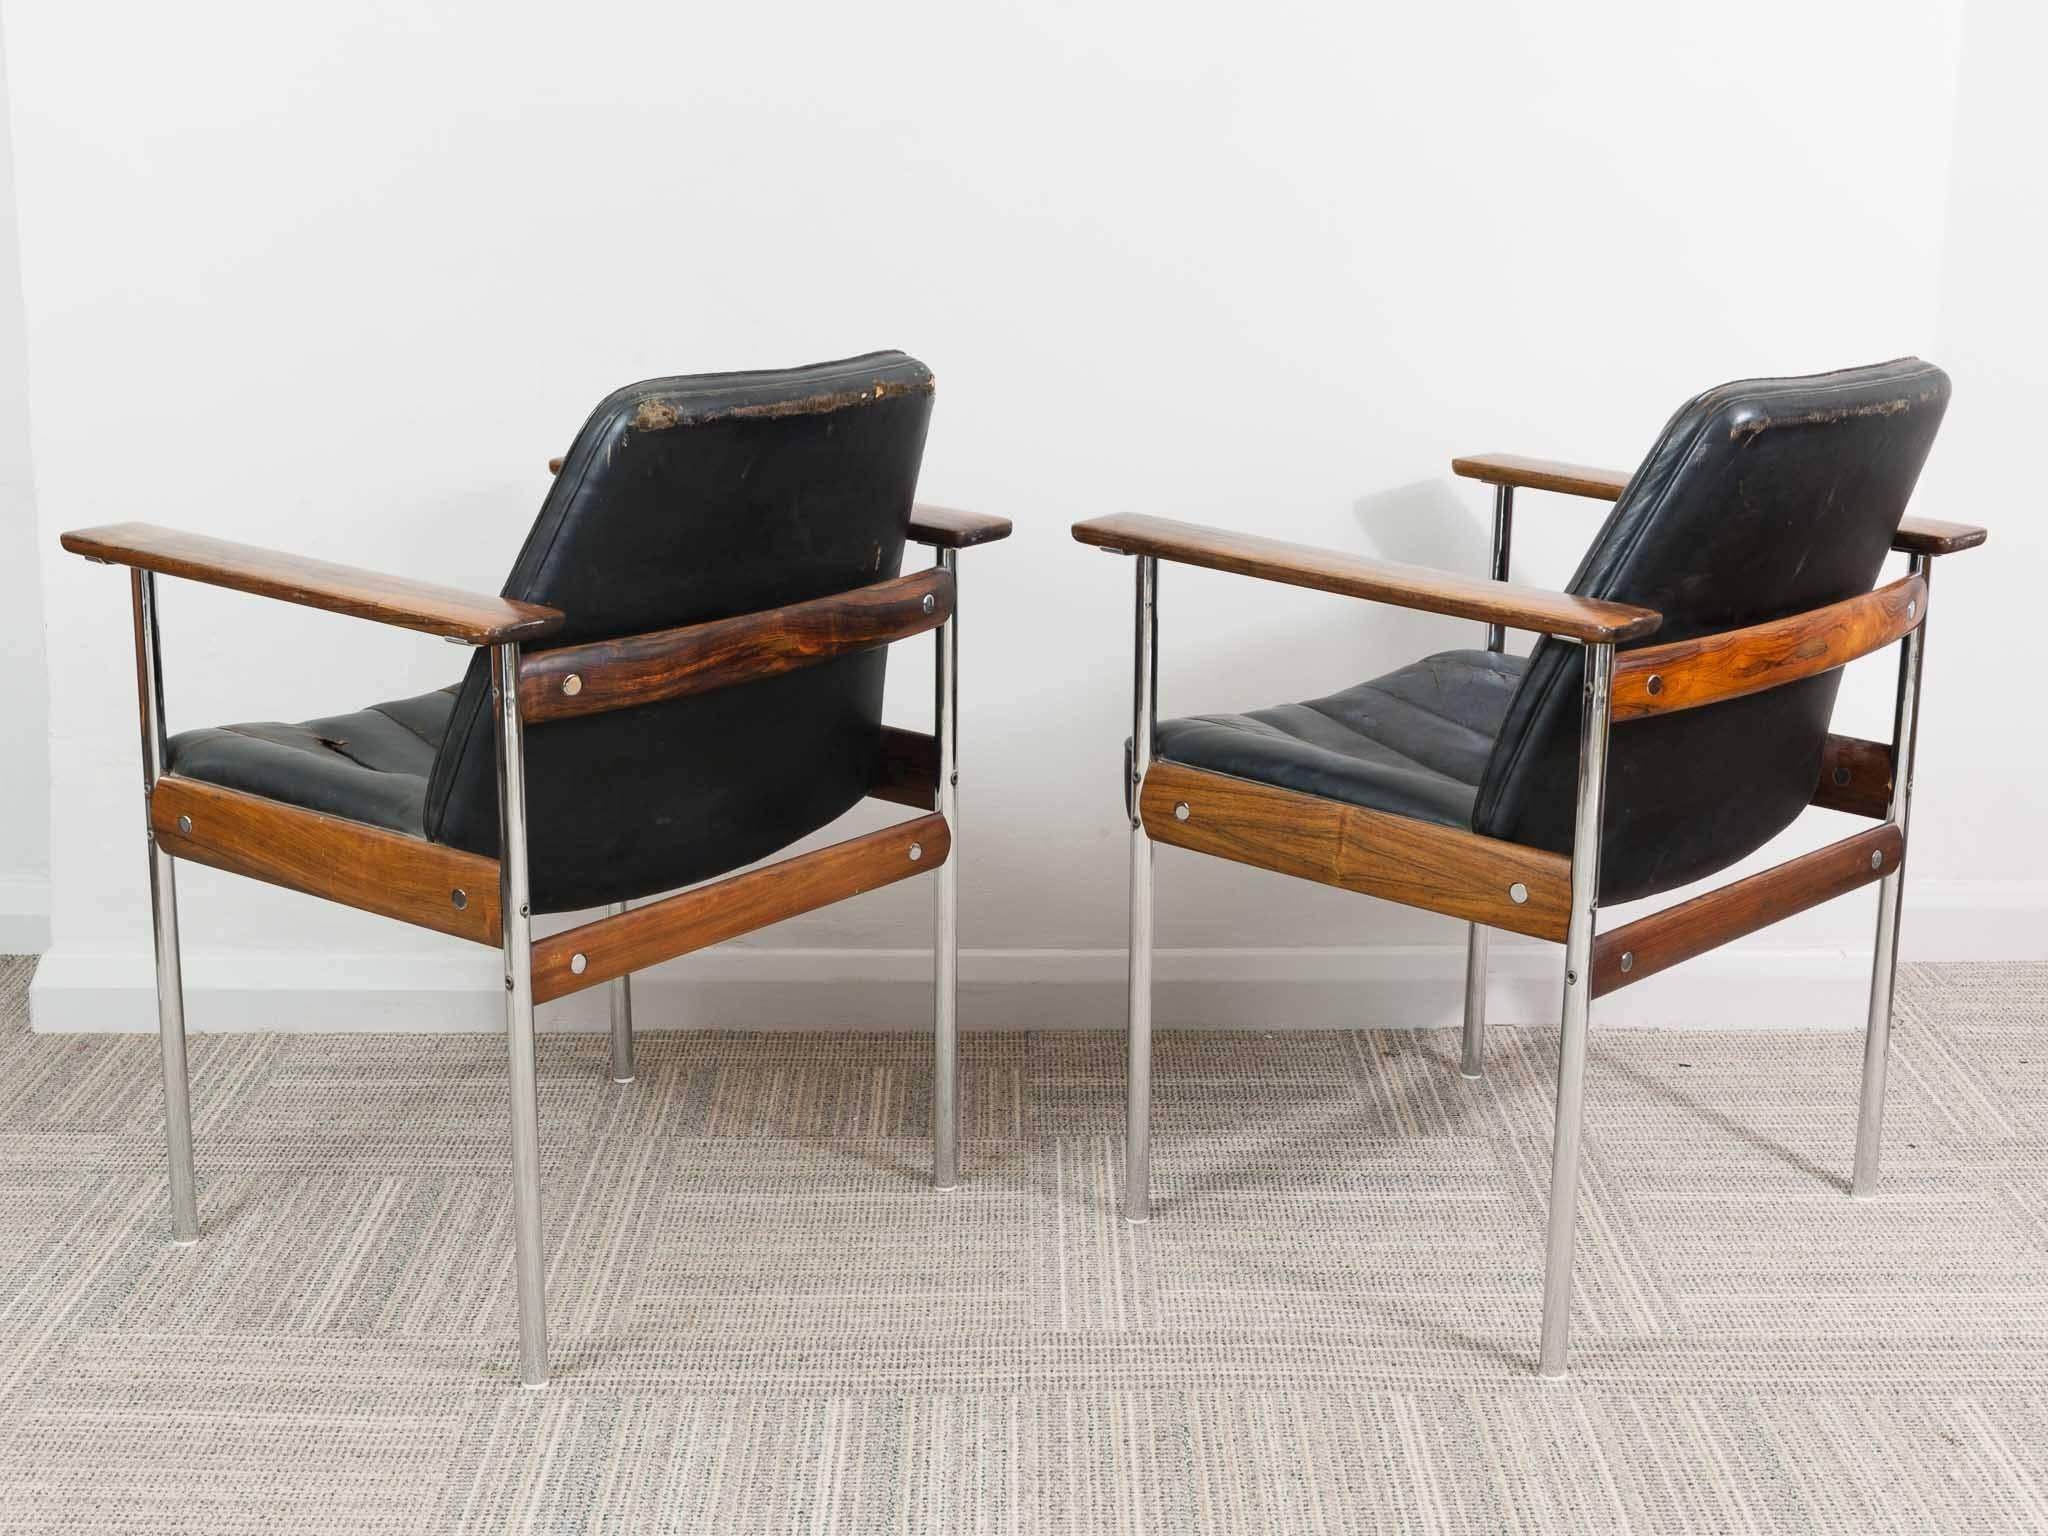 Norwegian Pair of 1960s Rosewood Leather Chrome Armchairs by Sven Ivar Dysthe for Dokka